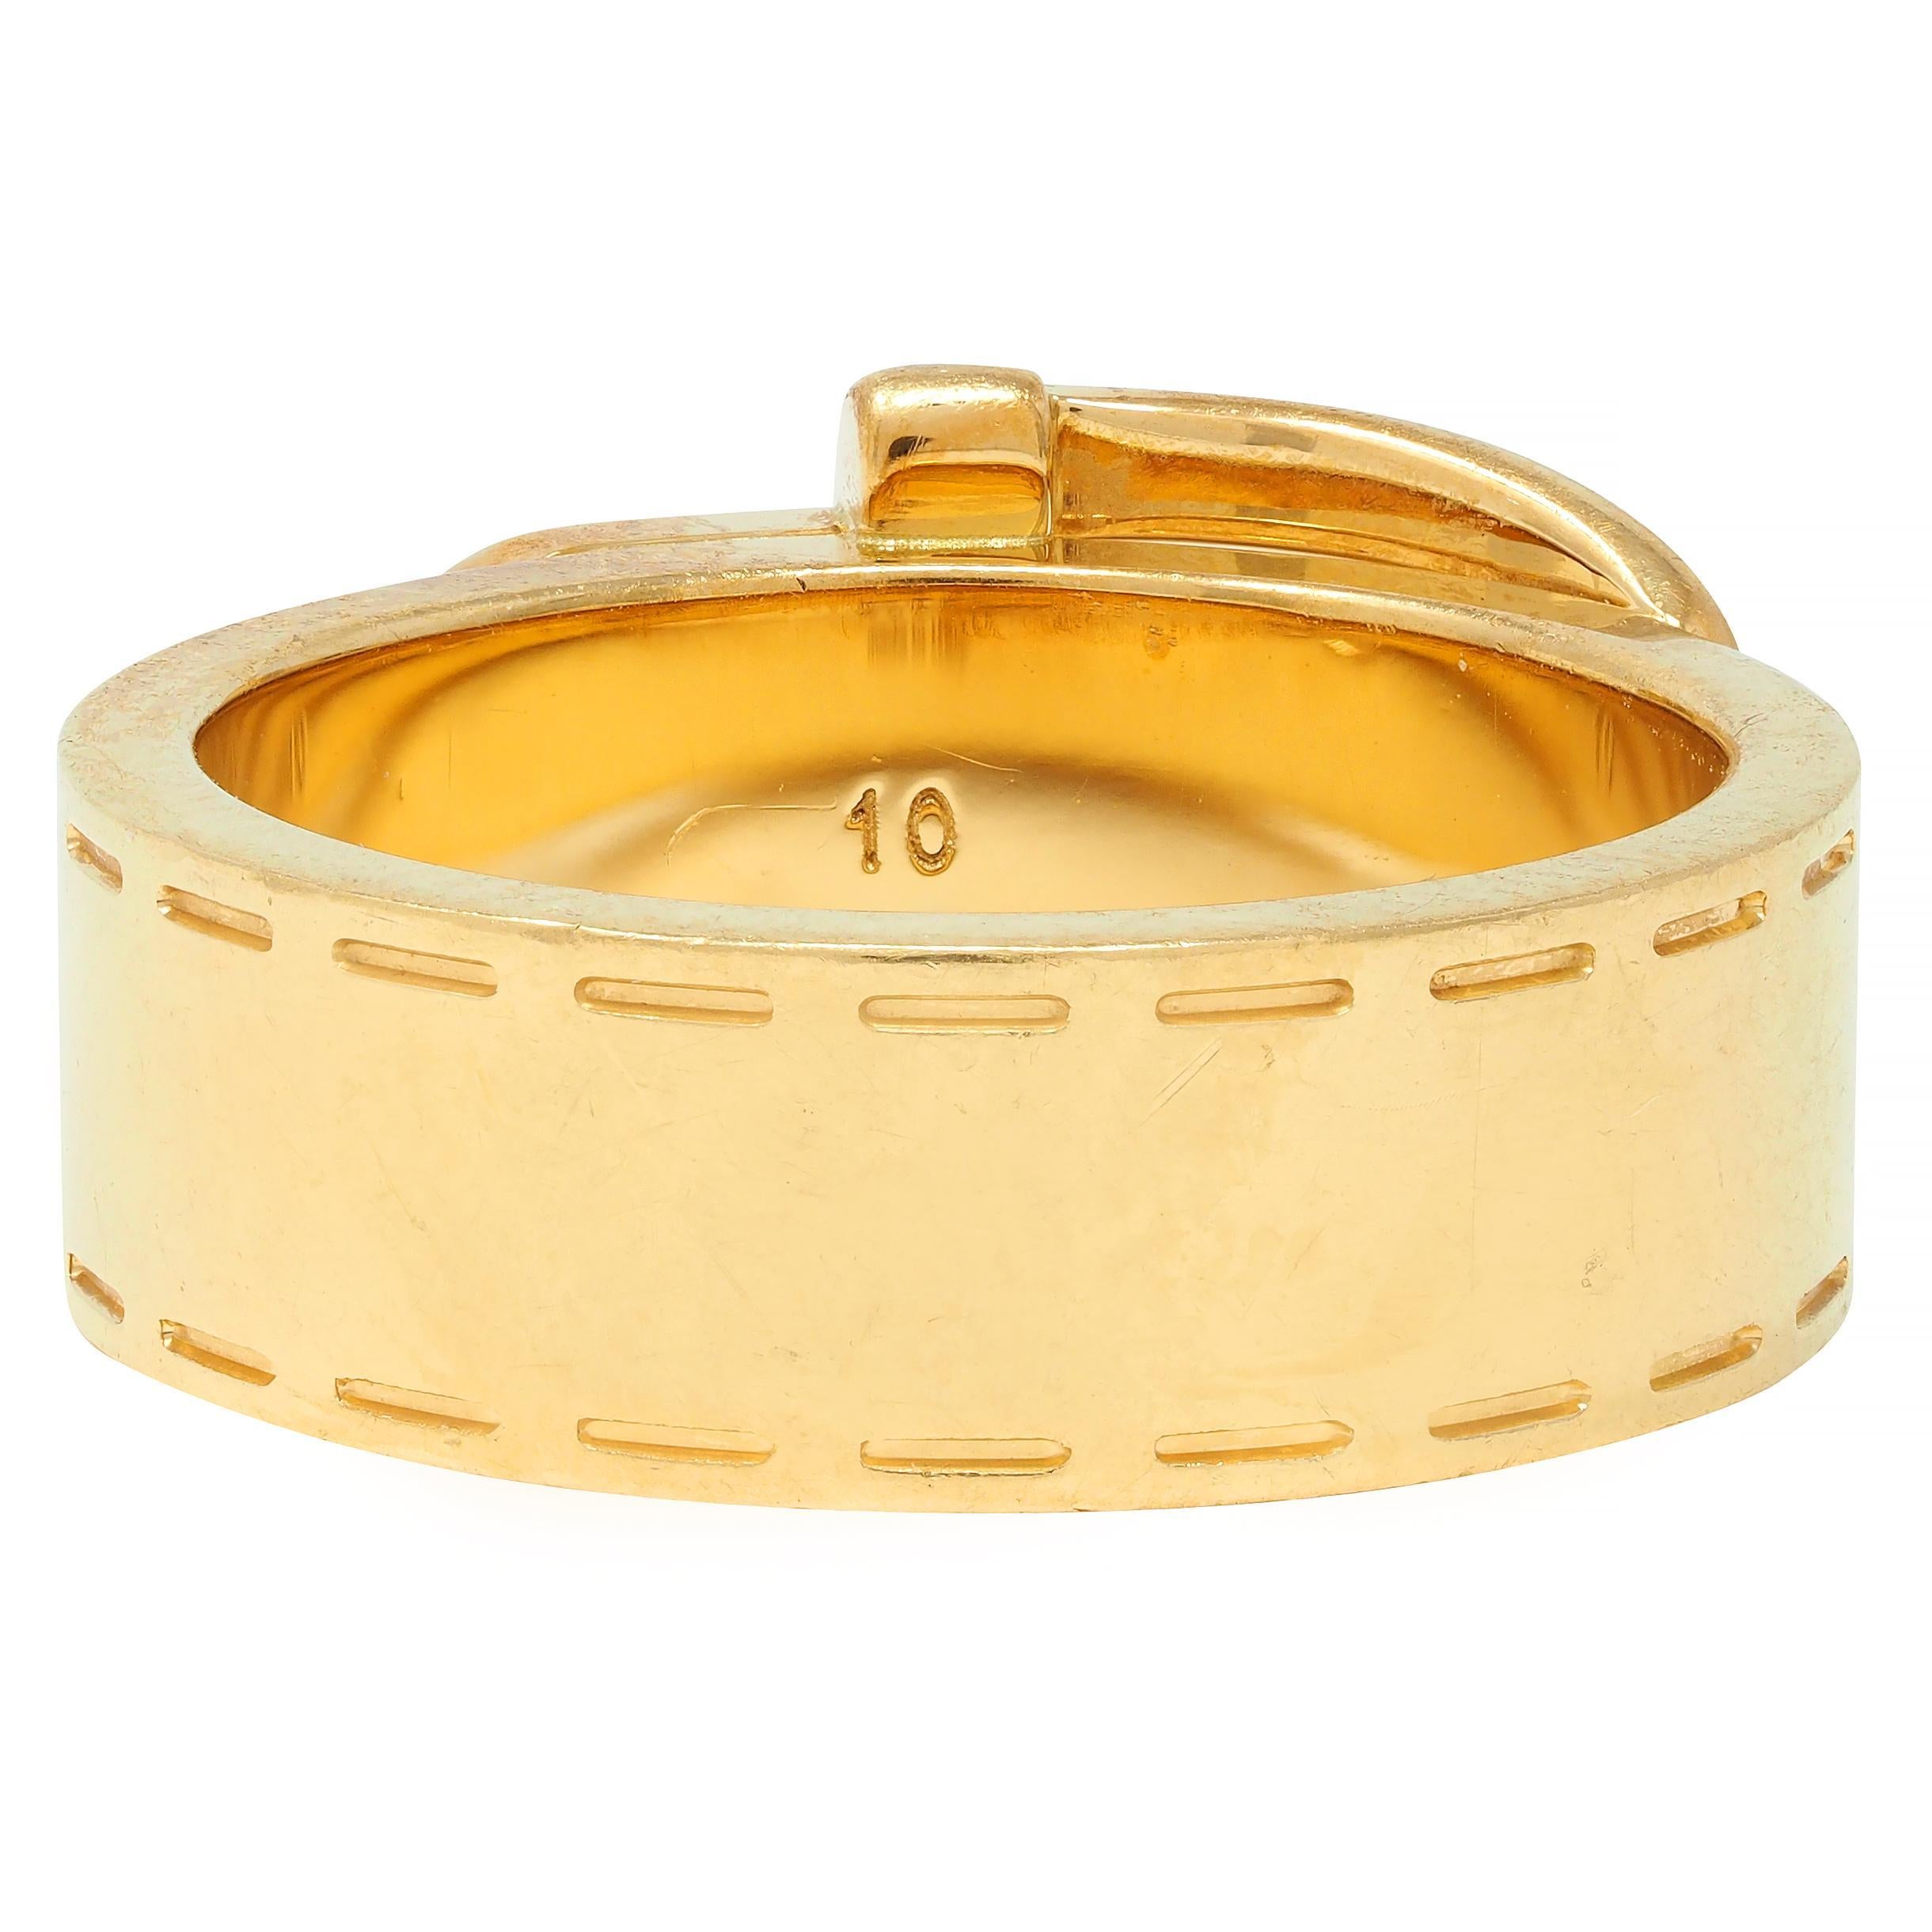 Gucci Contemporary 18 Karat Yellow Gold Belt Buckle Band Ring In Excellent Condition For Sale In Philadelphia, PA